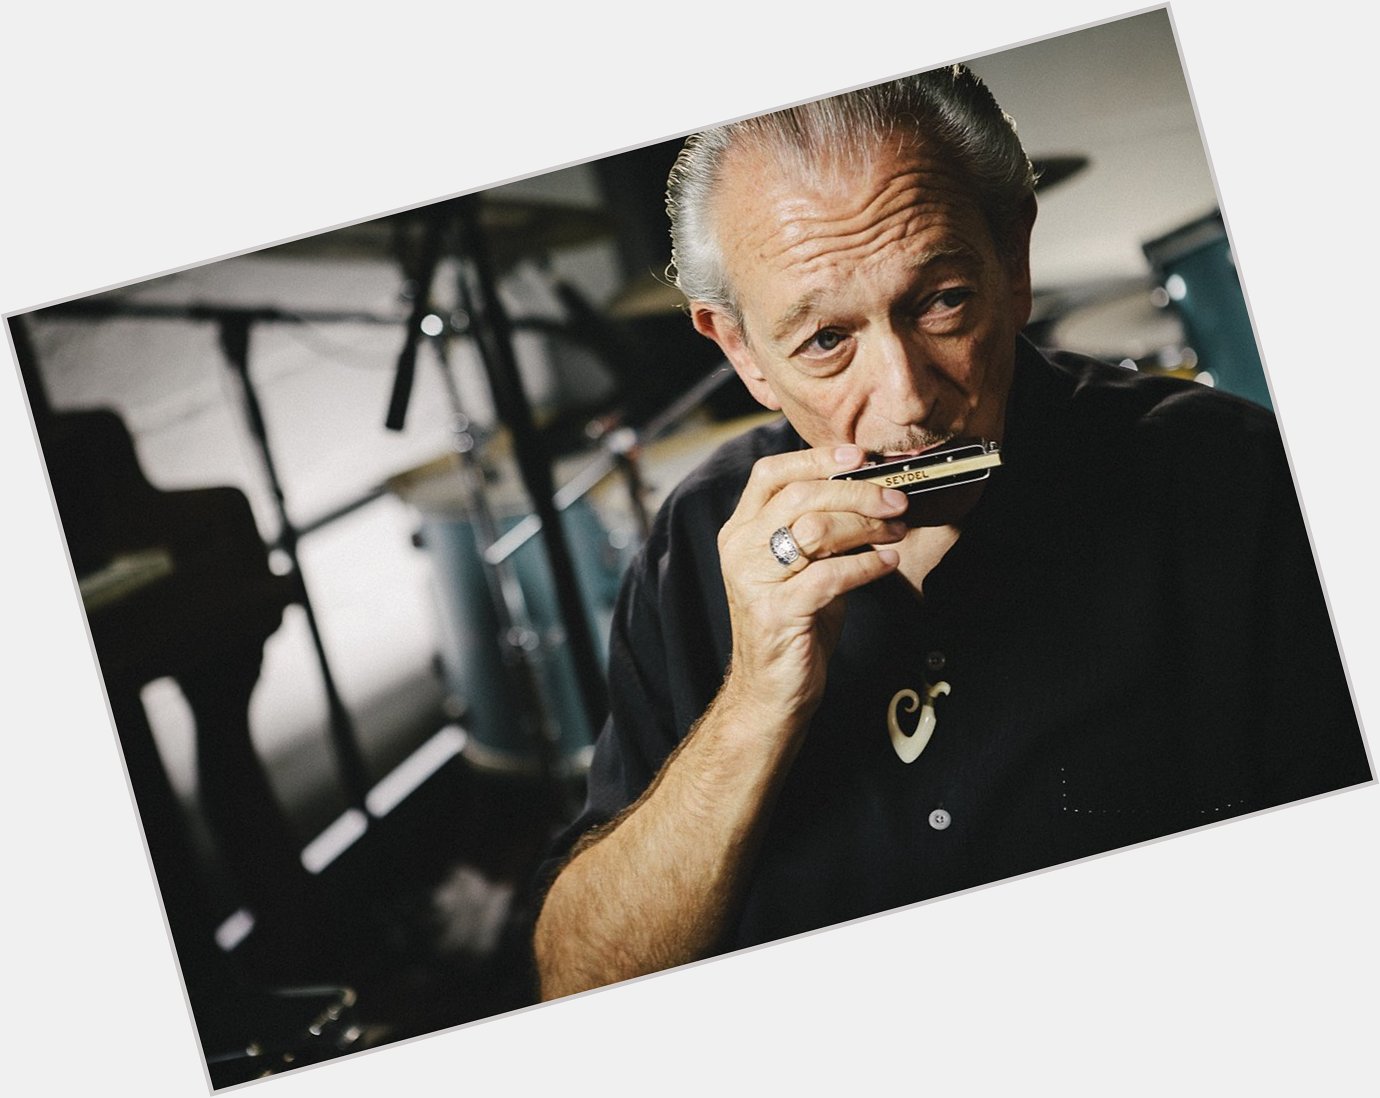 StaxRecords: A Very Happy Birthday to Charlie Musselwhite (musselwhiteharp)!  